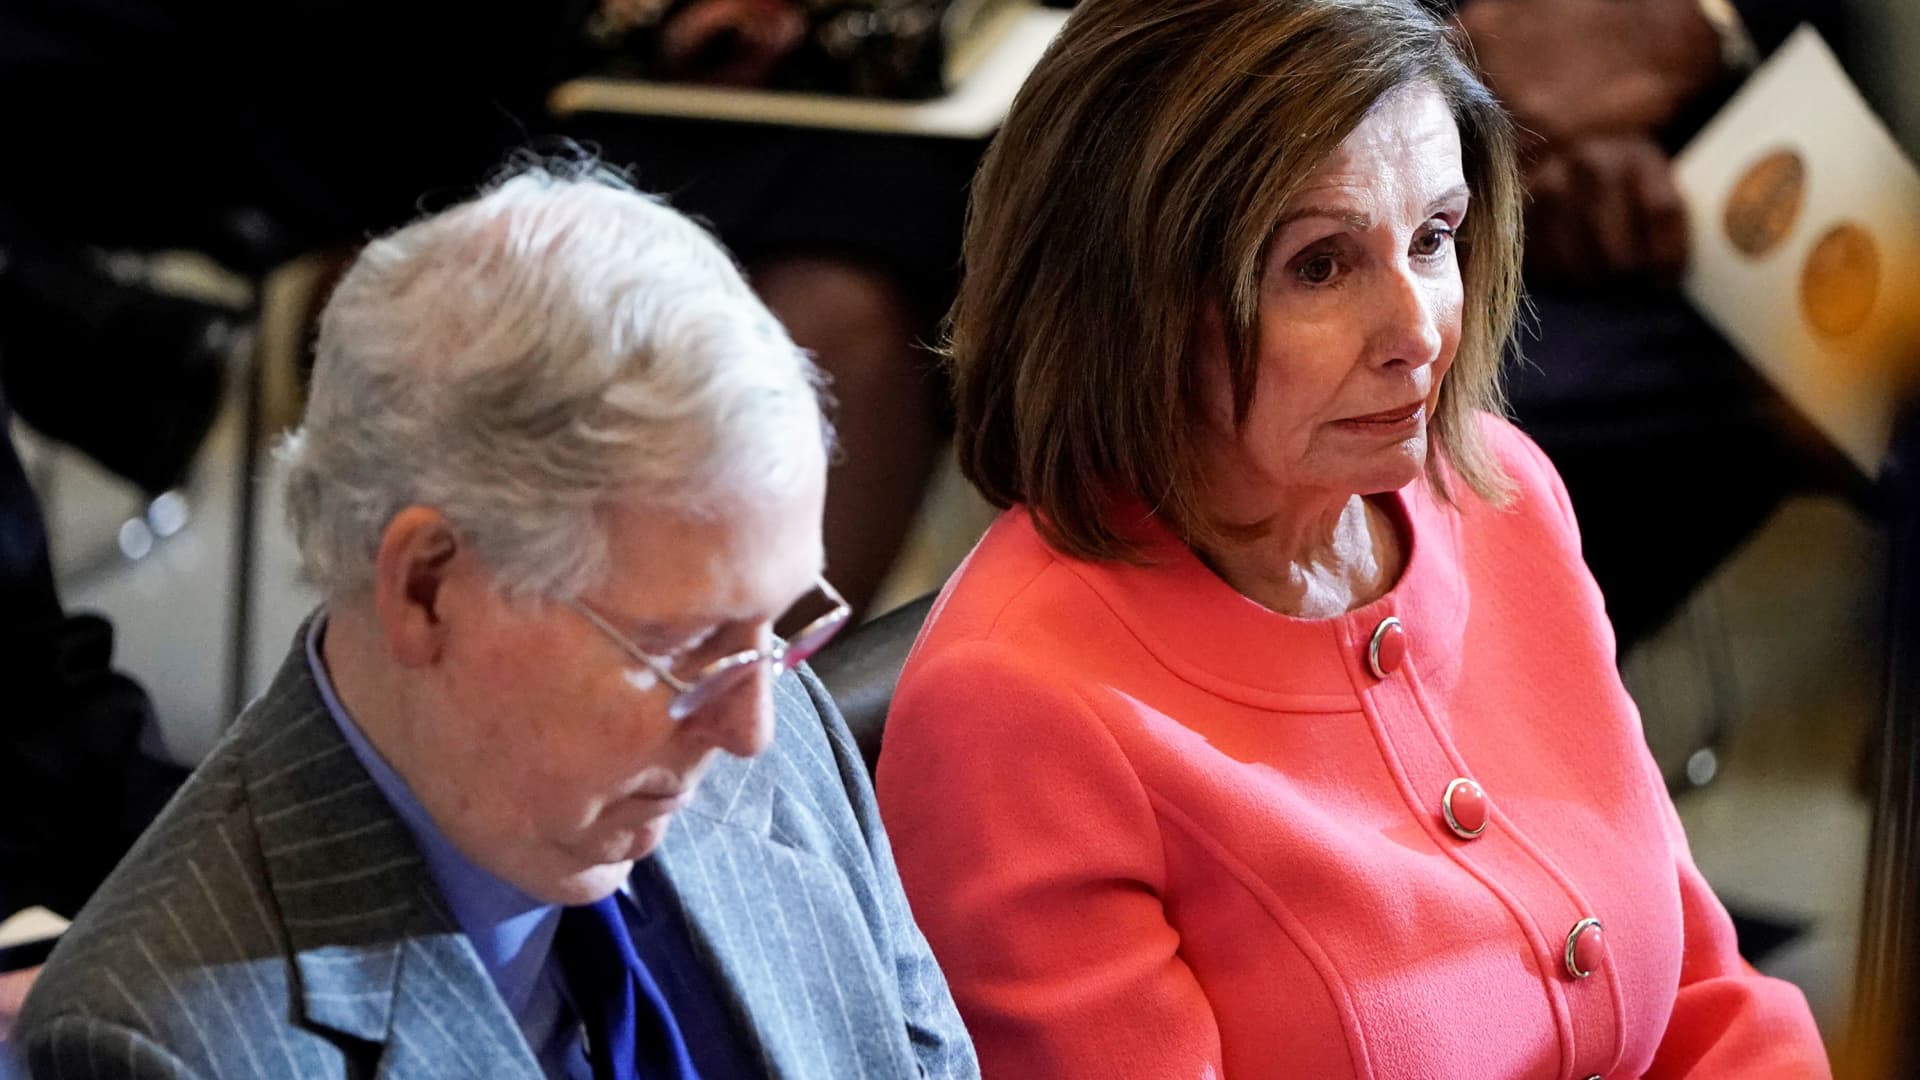 House Speaker Nancy Pelosi (D-CA) and Senate Majority Leader Mitch McConnell (R-KY) sit next to each other during a Congressional Gold Medal Award ceremony for Steve Gleason at the U.S. Capitol in Washington, January 15, 2020.